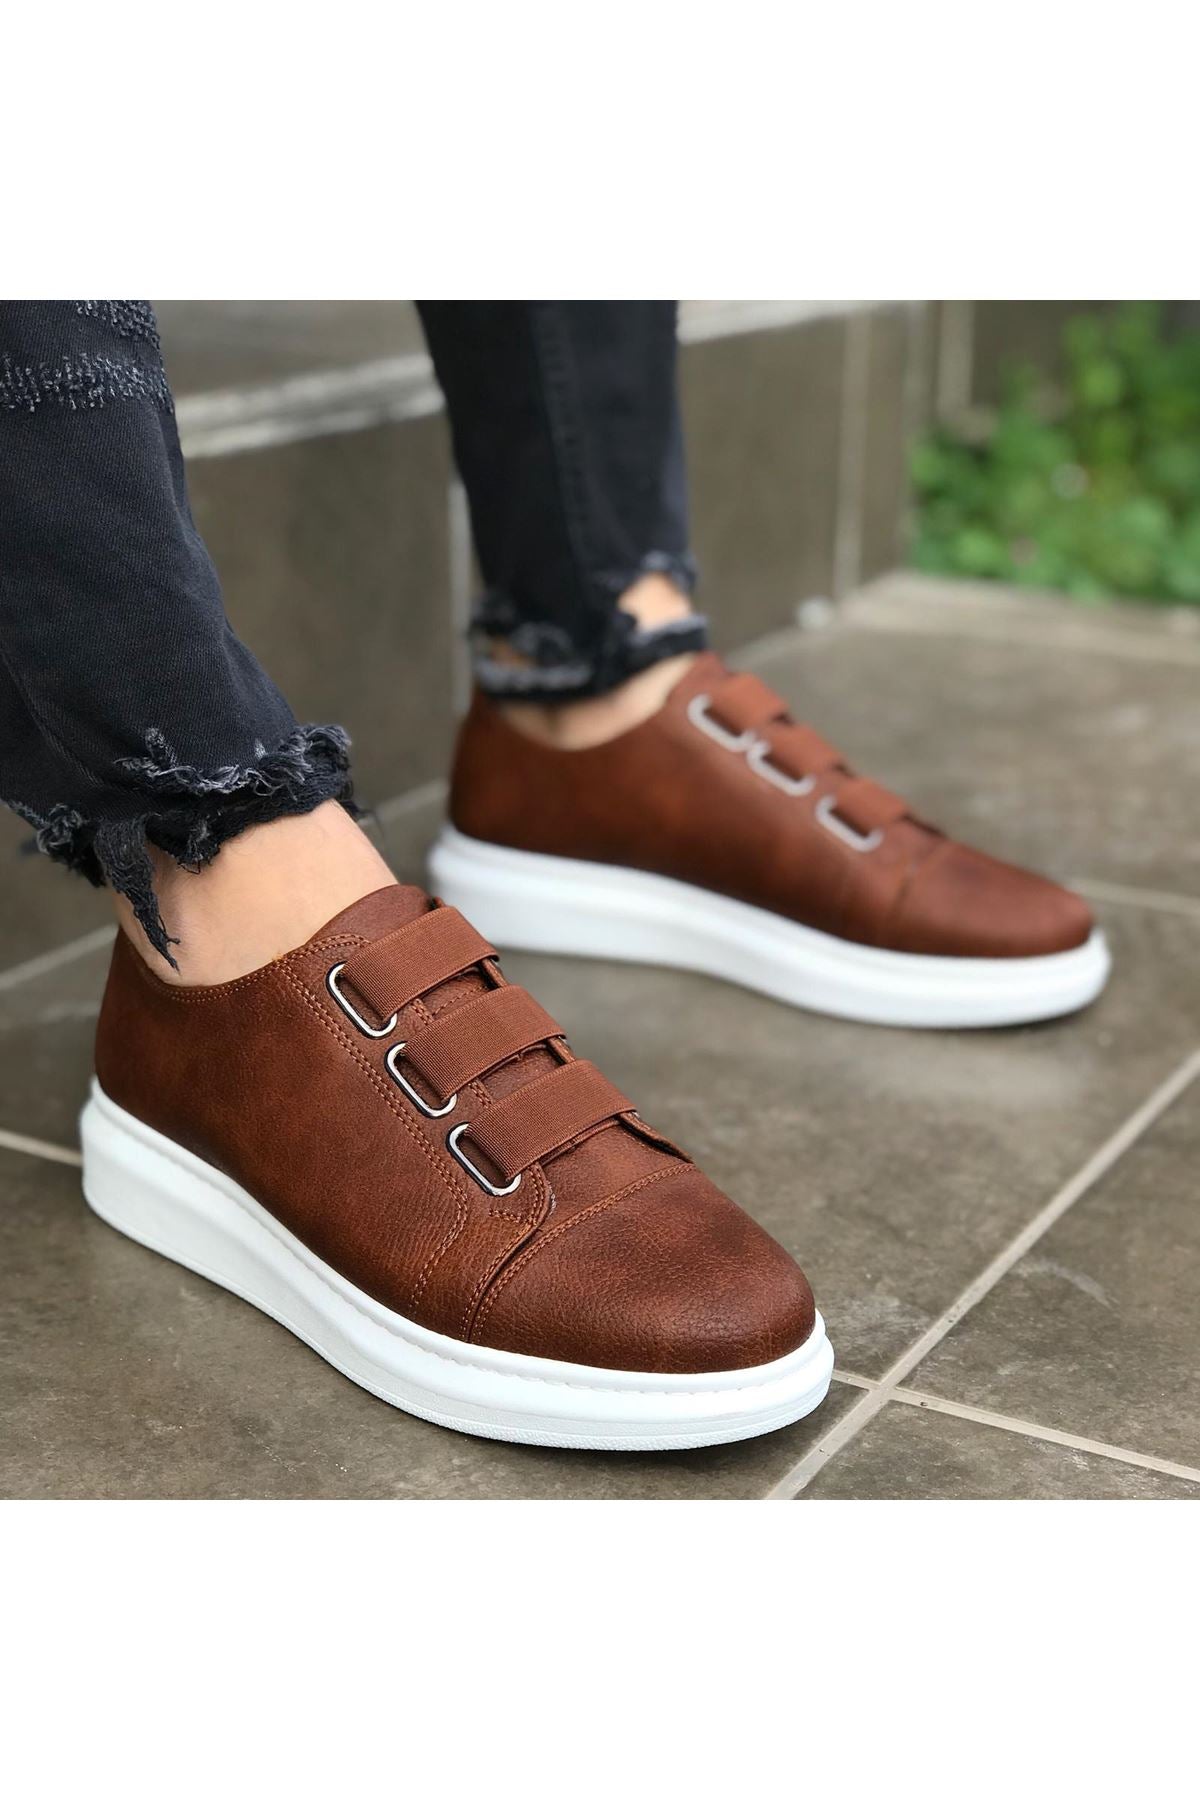 WG026 3 Band Tan Thick Sole Casual Men's Shoes - STREETMODE ™